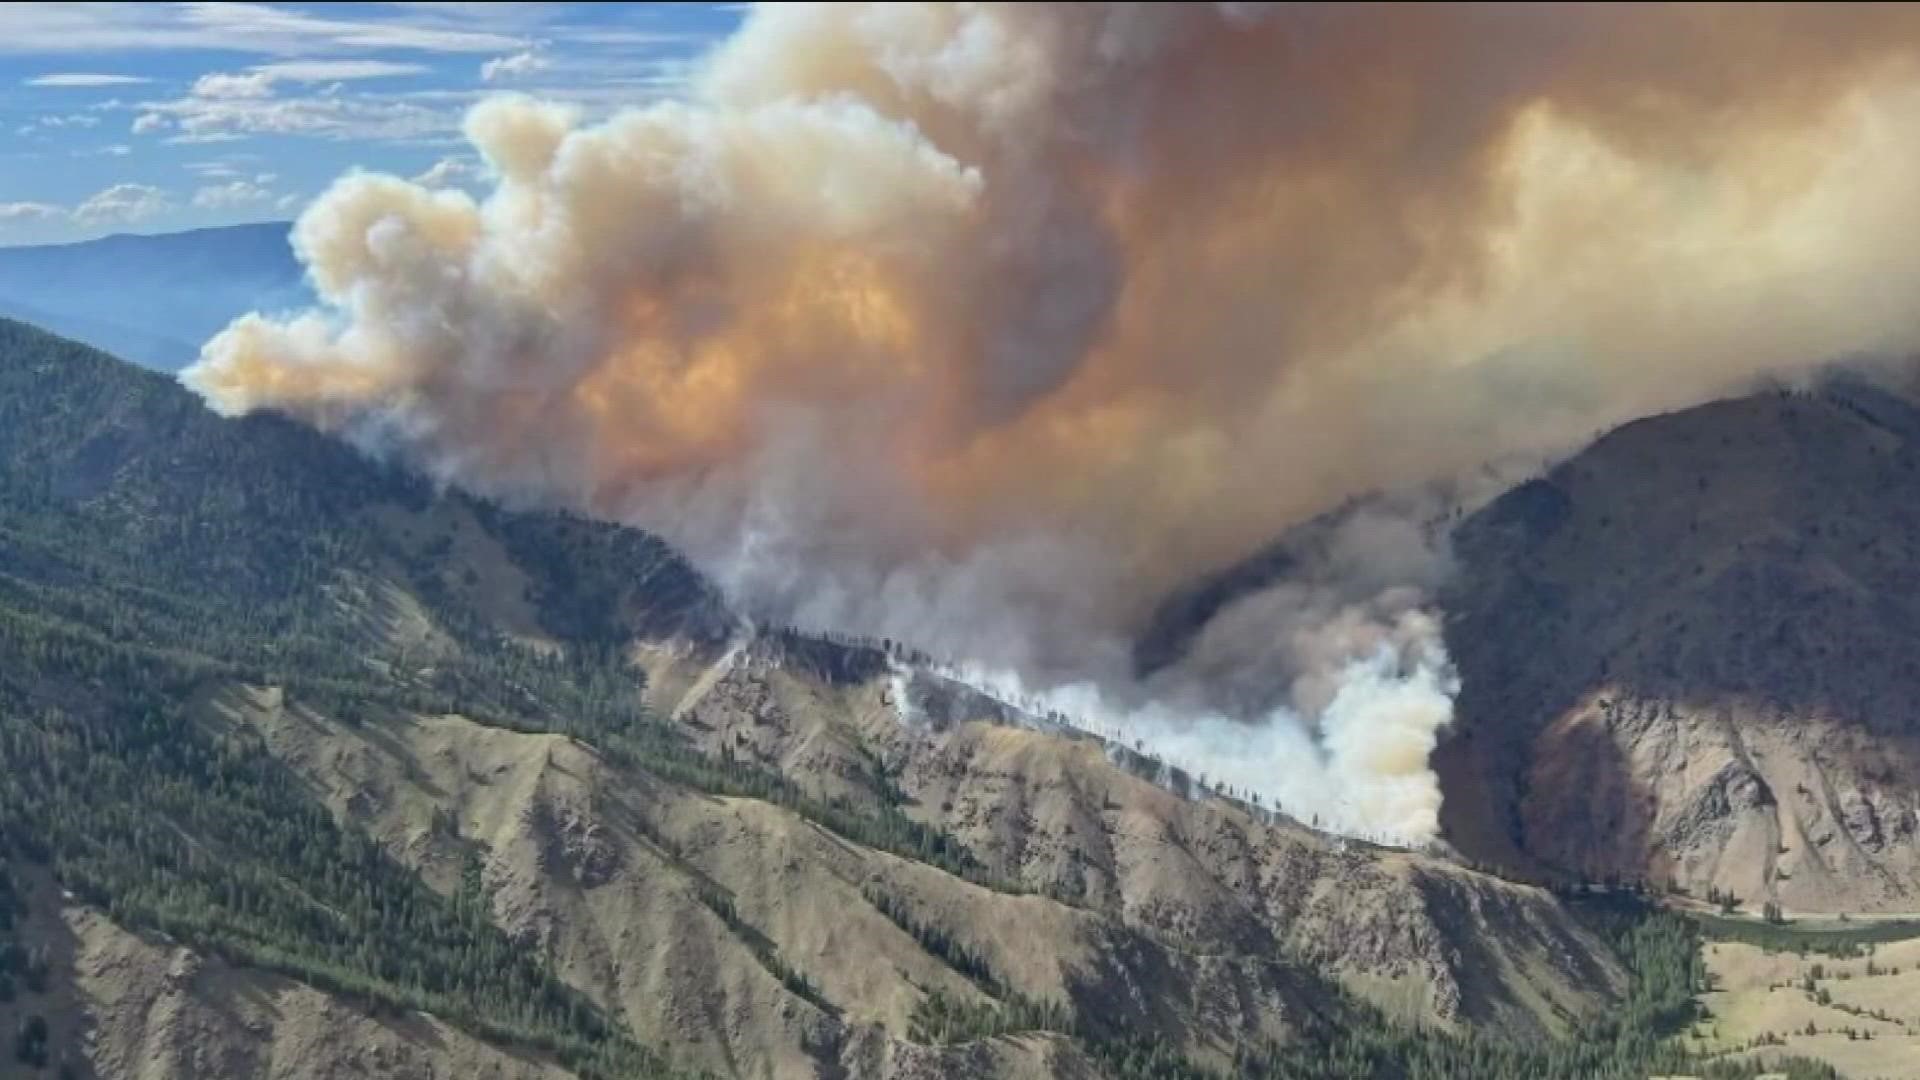 The Moose Fire has grown to an estimated 72,710 acres -- about 113.6 square miles, more than 1 1/3 times the area of the Boise city limits.